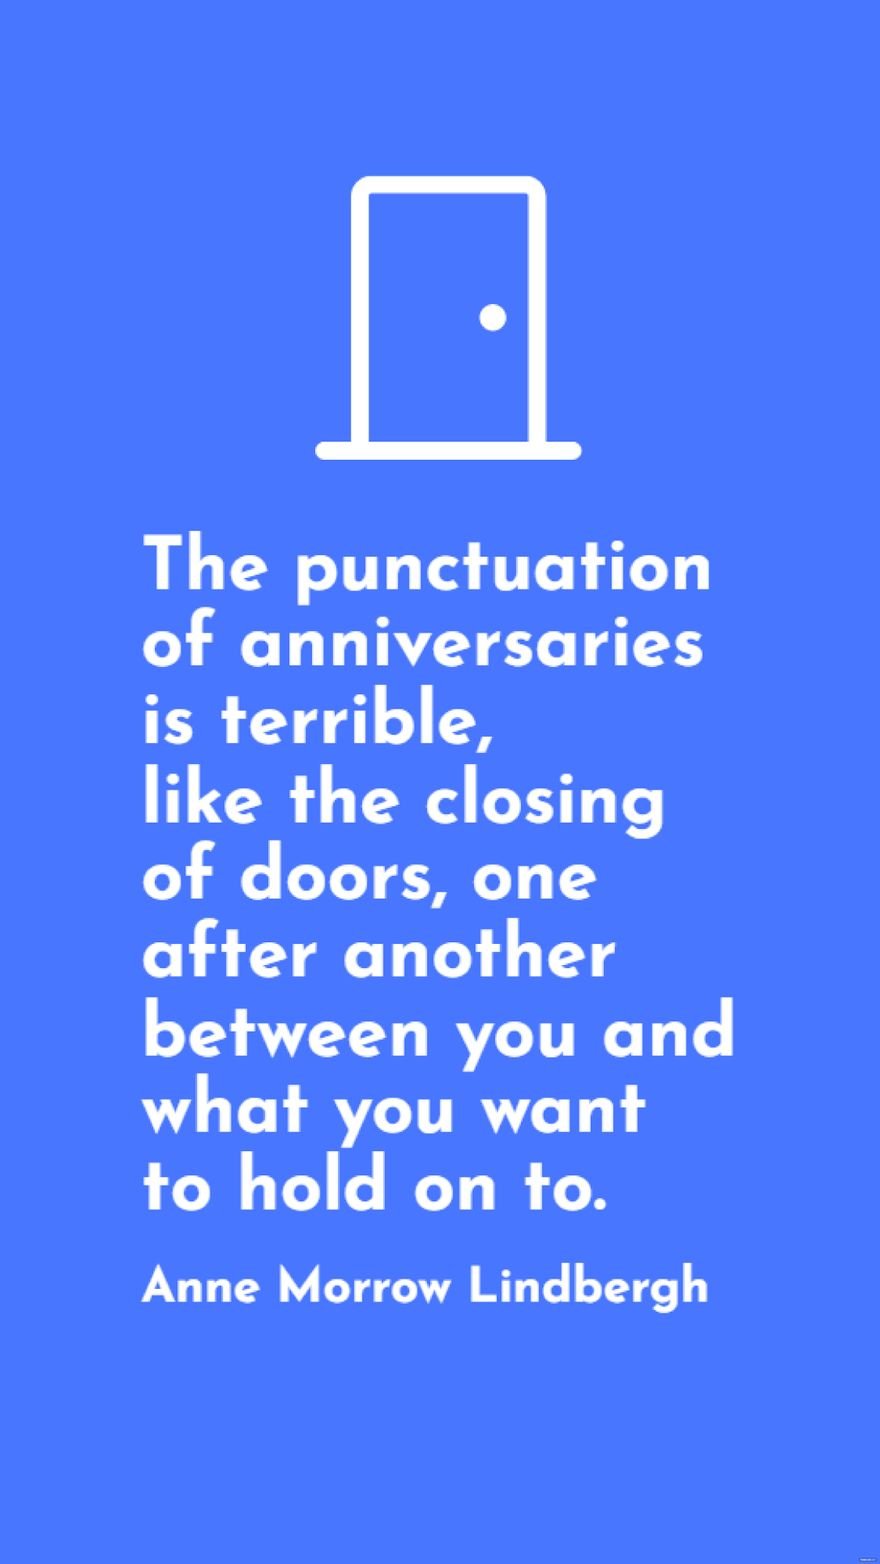 Anne Morrow Lindbergh - The punctuation of anniversaries is terrible, like the closing of doors, one after another between you and what you want to hold on to. in JPG